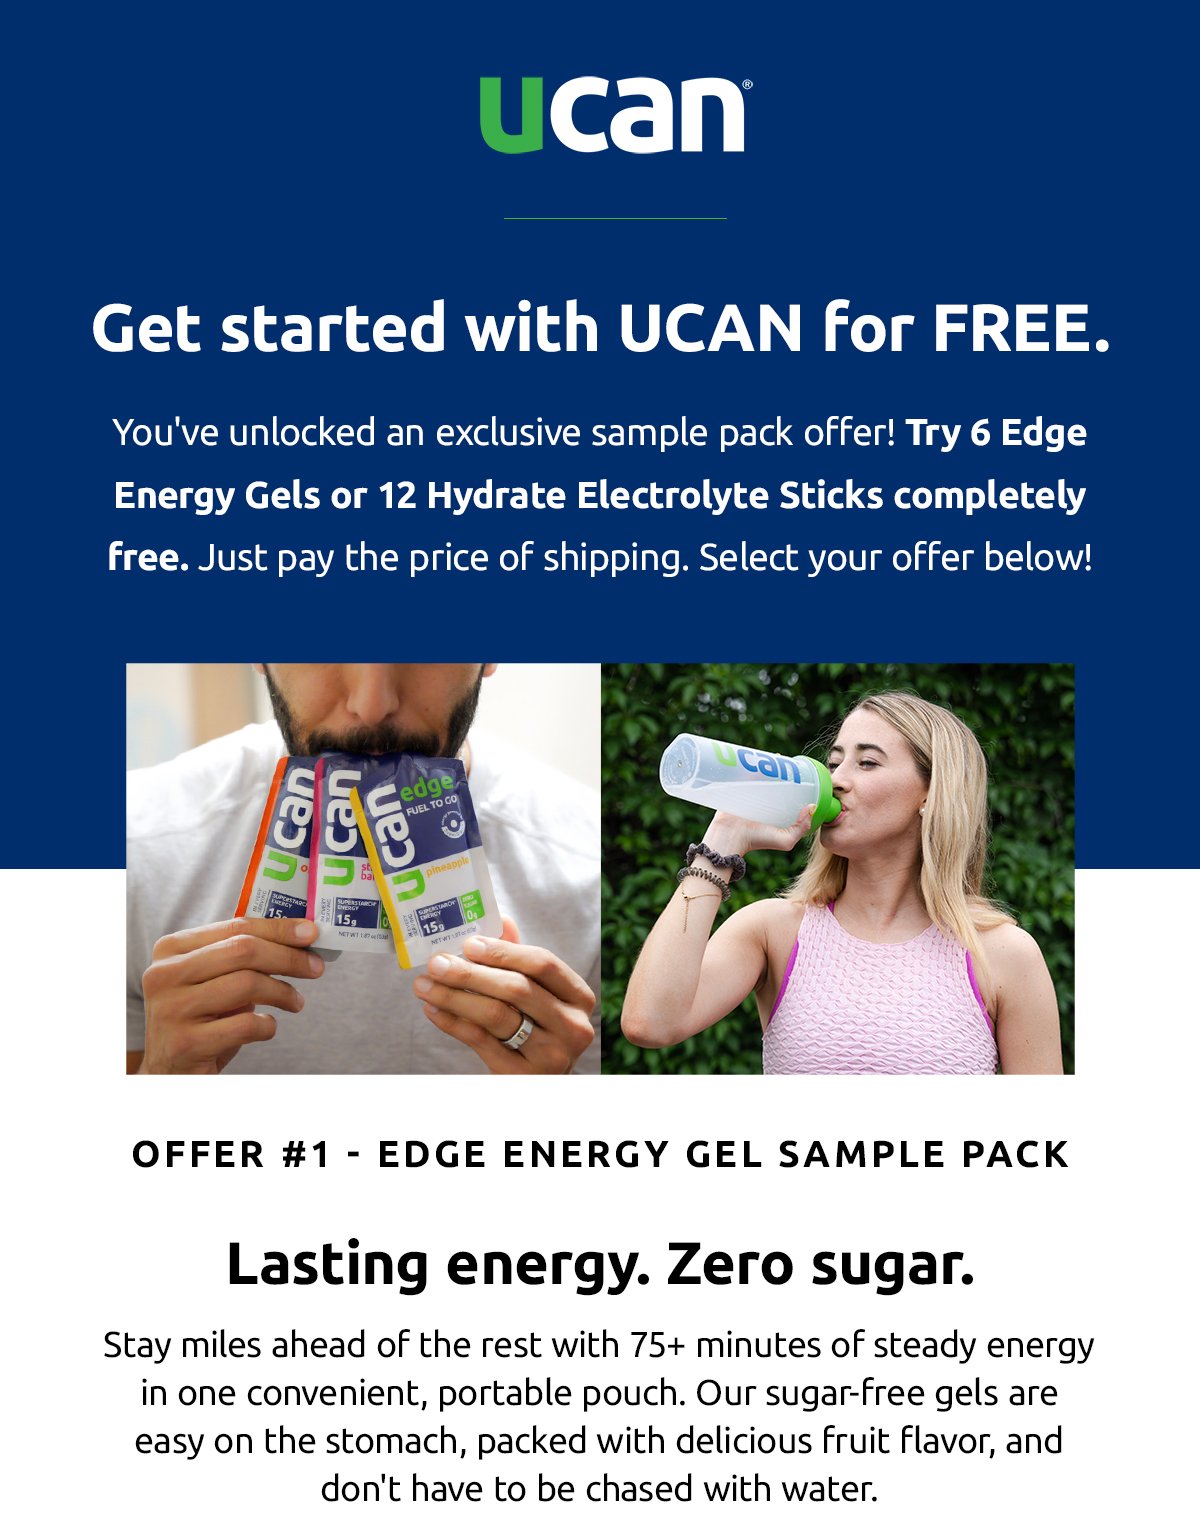 Unmissable Free Samples